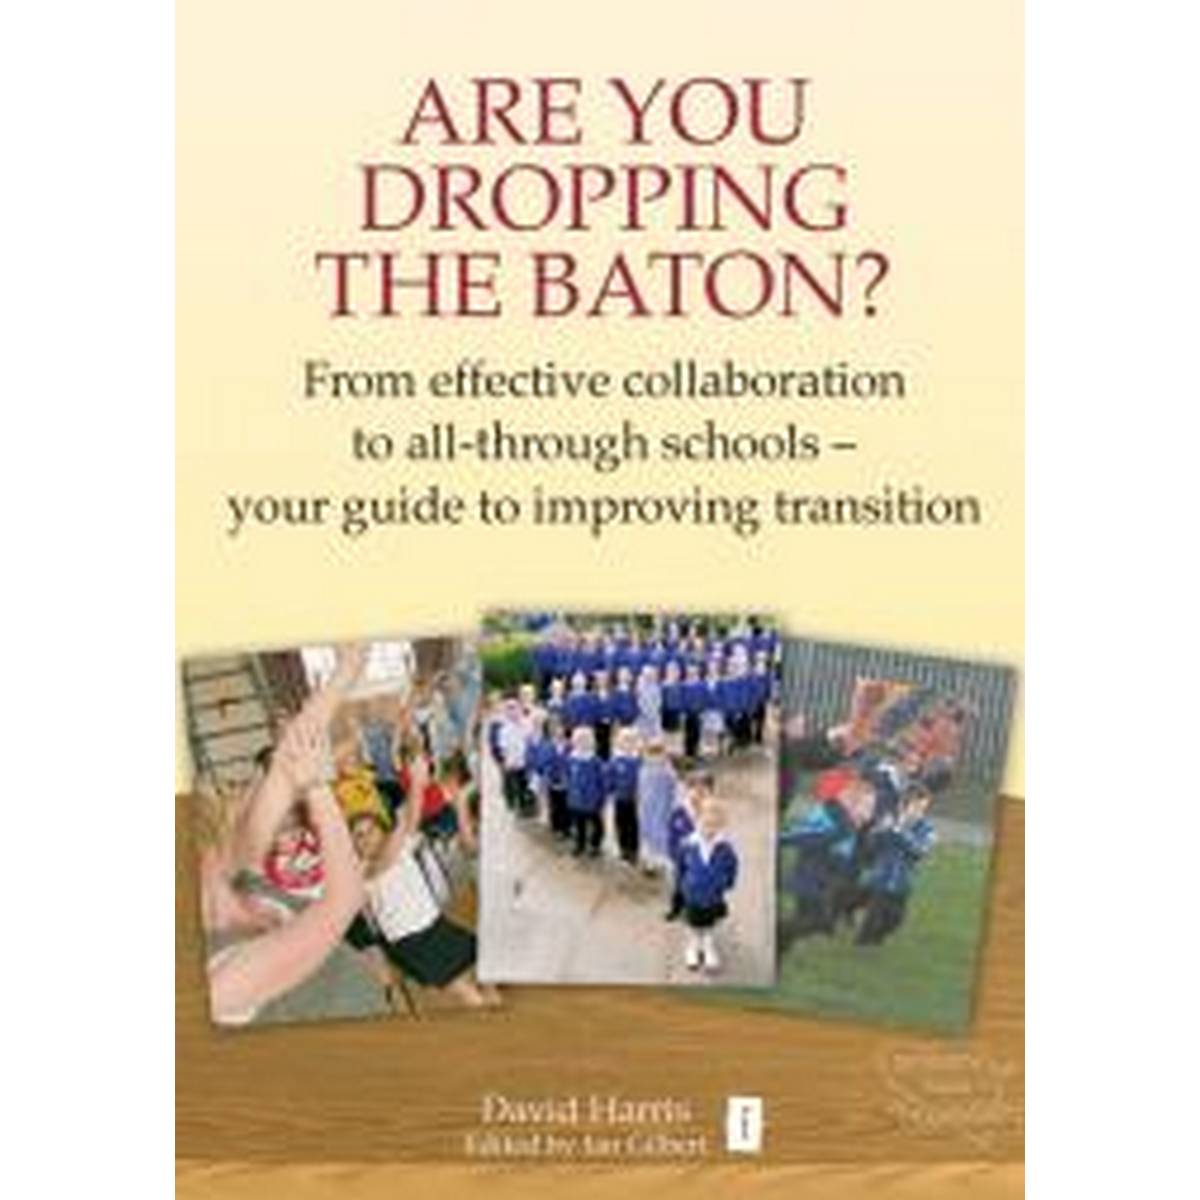 Are you Dropping the Baton?